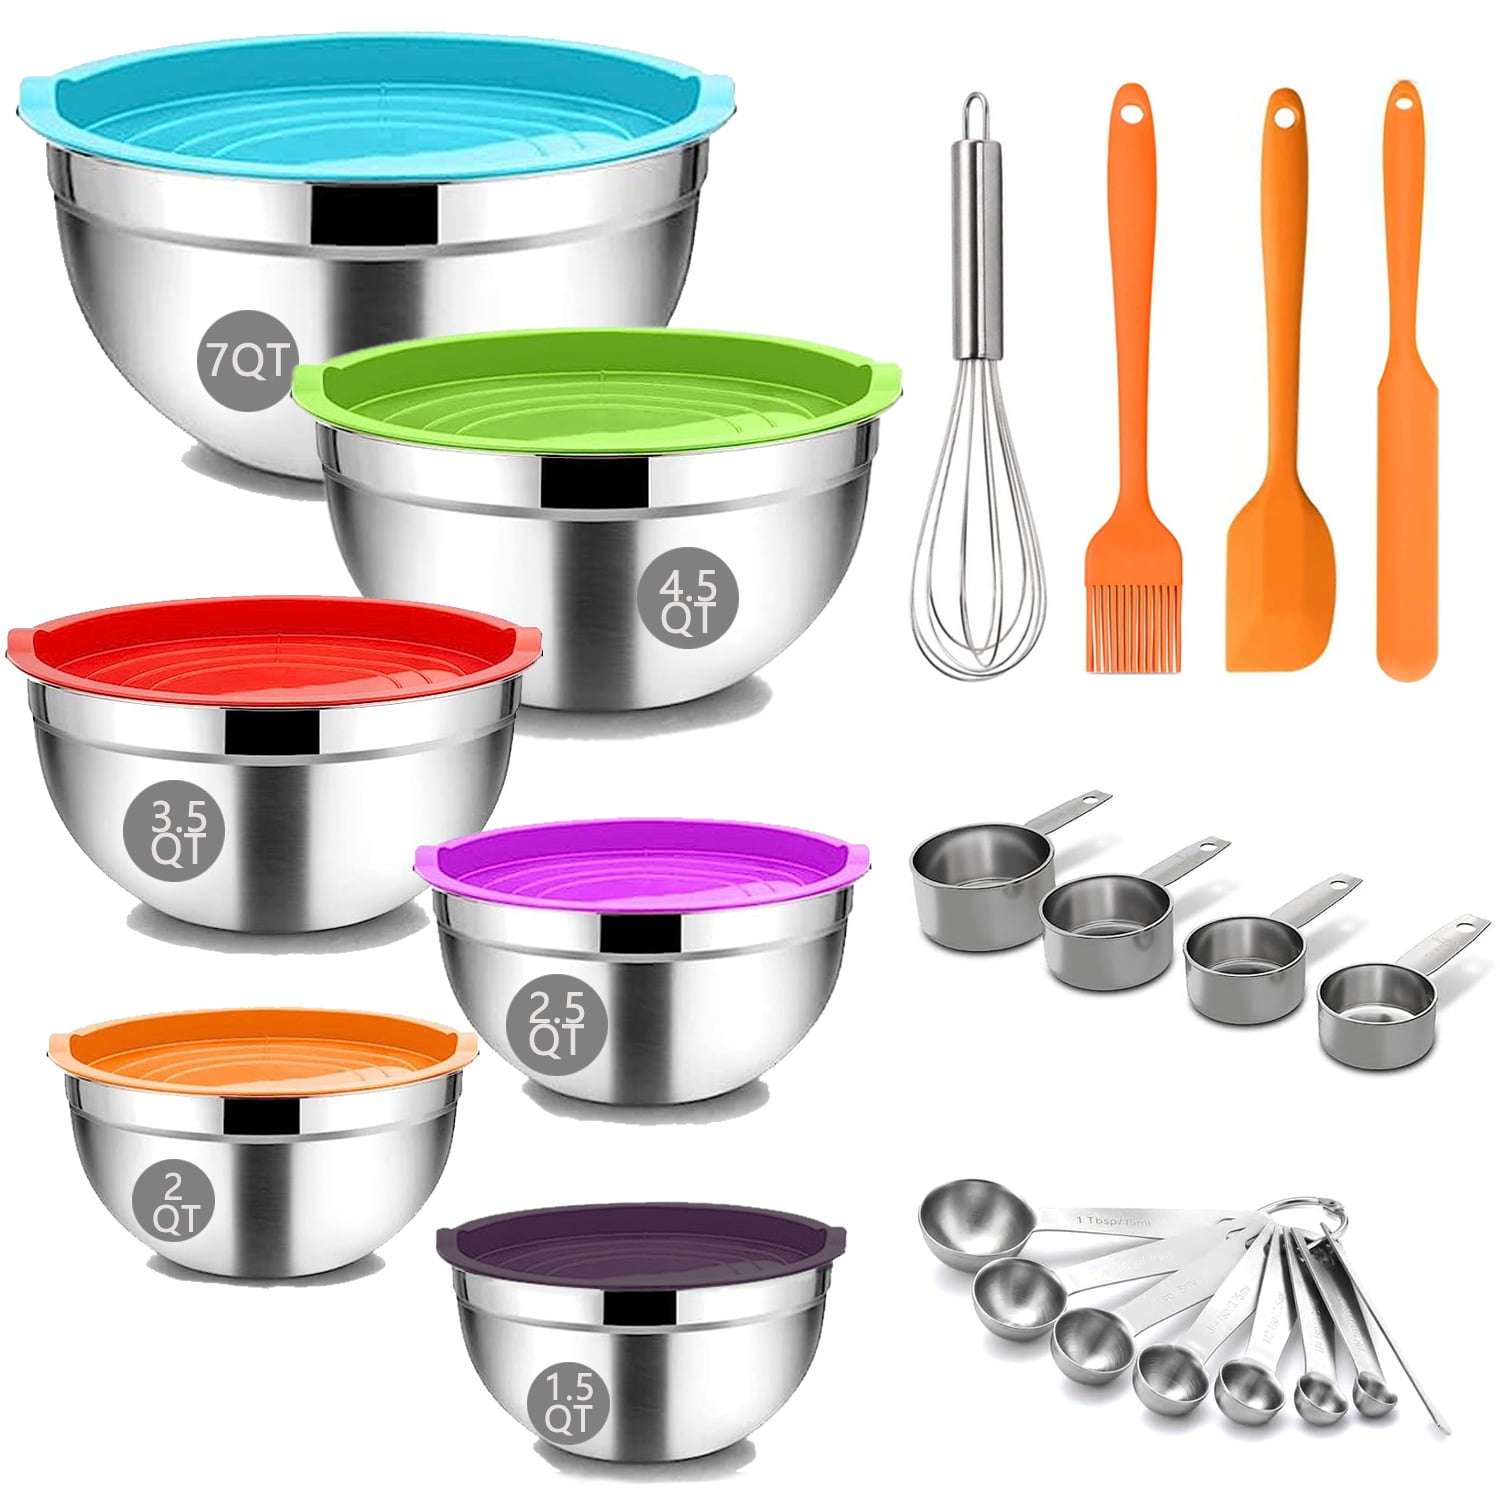  Mixing Bowls with Lid Set, 23PCS Kitchen Utensils Metal Bowl  Stainless Steel Nesting Bowls, Measuring Cups and Spoons, Egg Whisk for  Baking Prepping Cooking Serving Supplies: Home & Kitchen